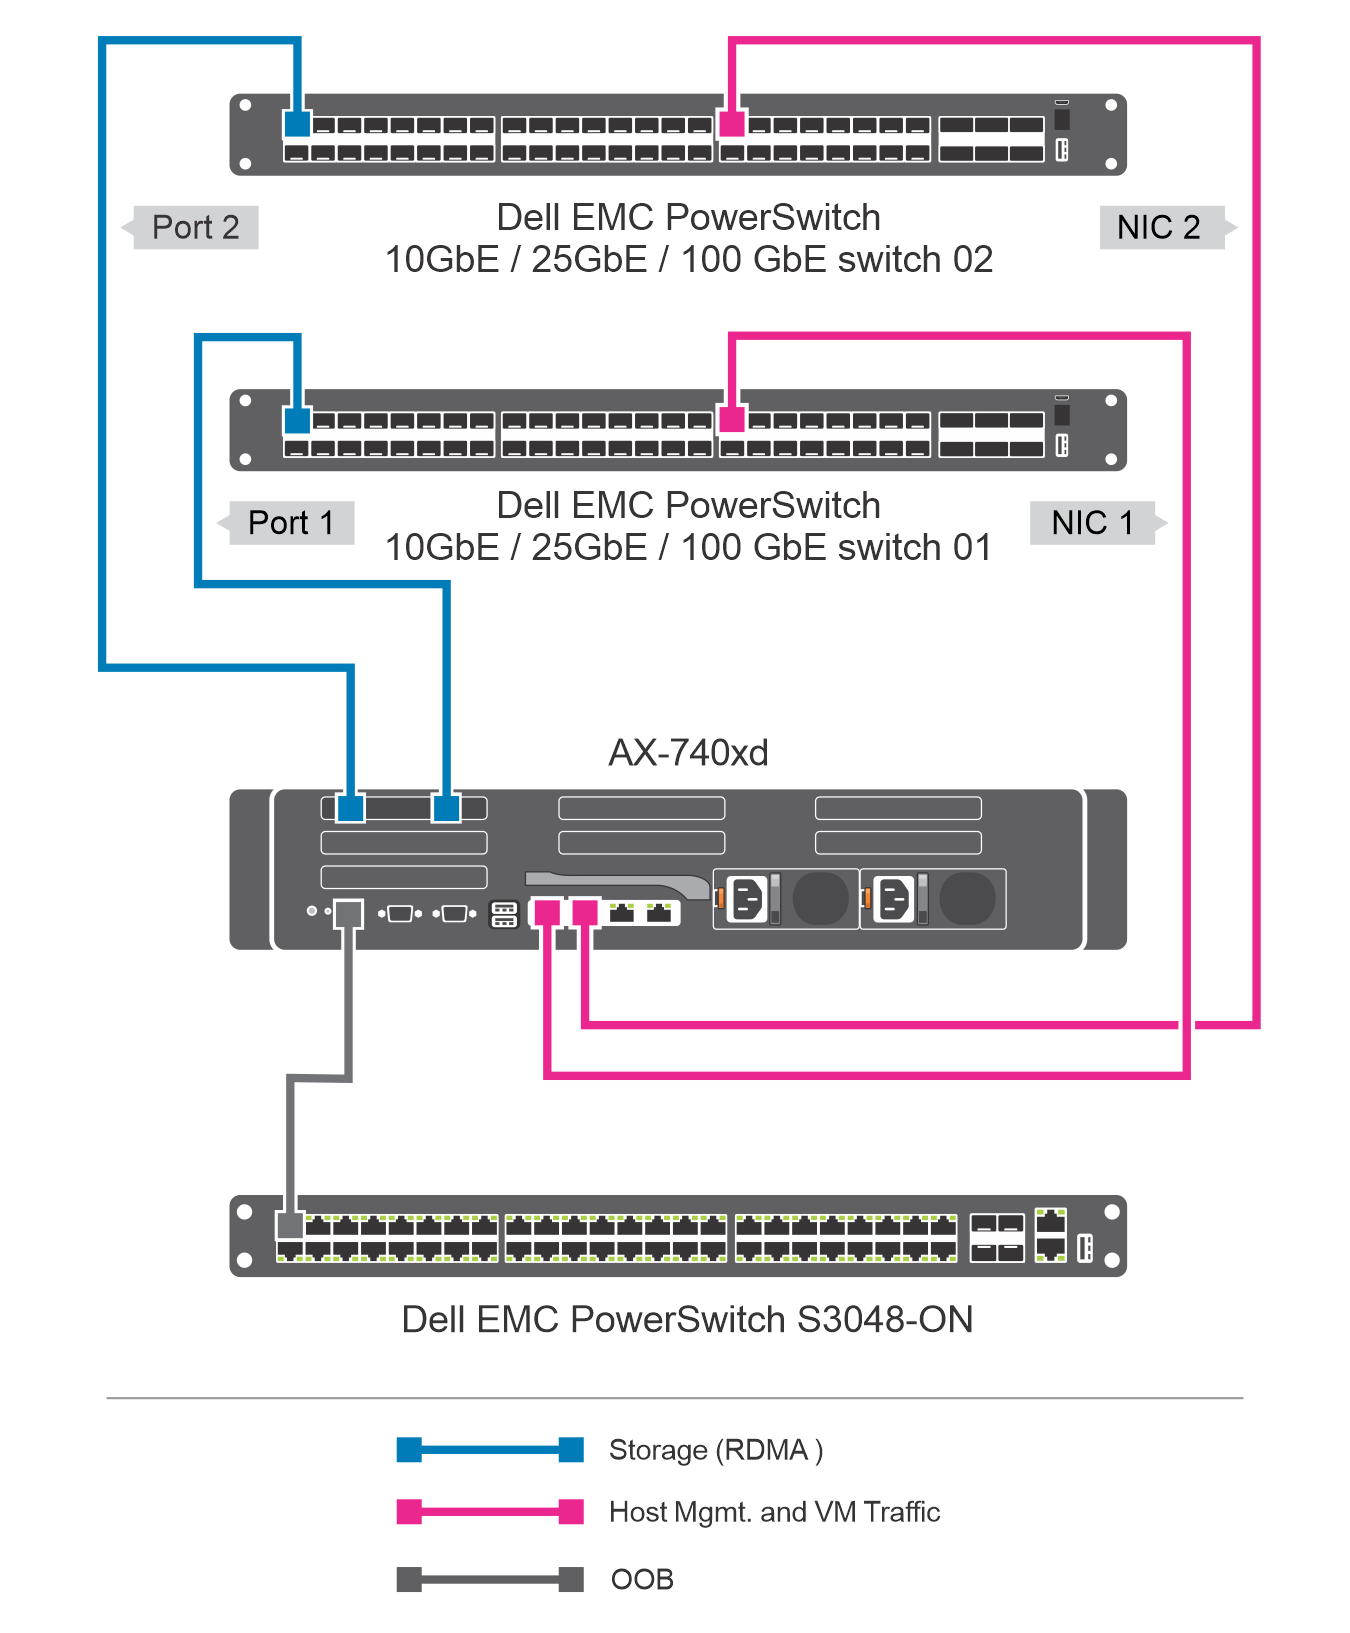 Figure showing network integration in a non-converged configuration with two NIC ports